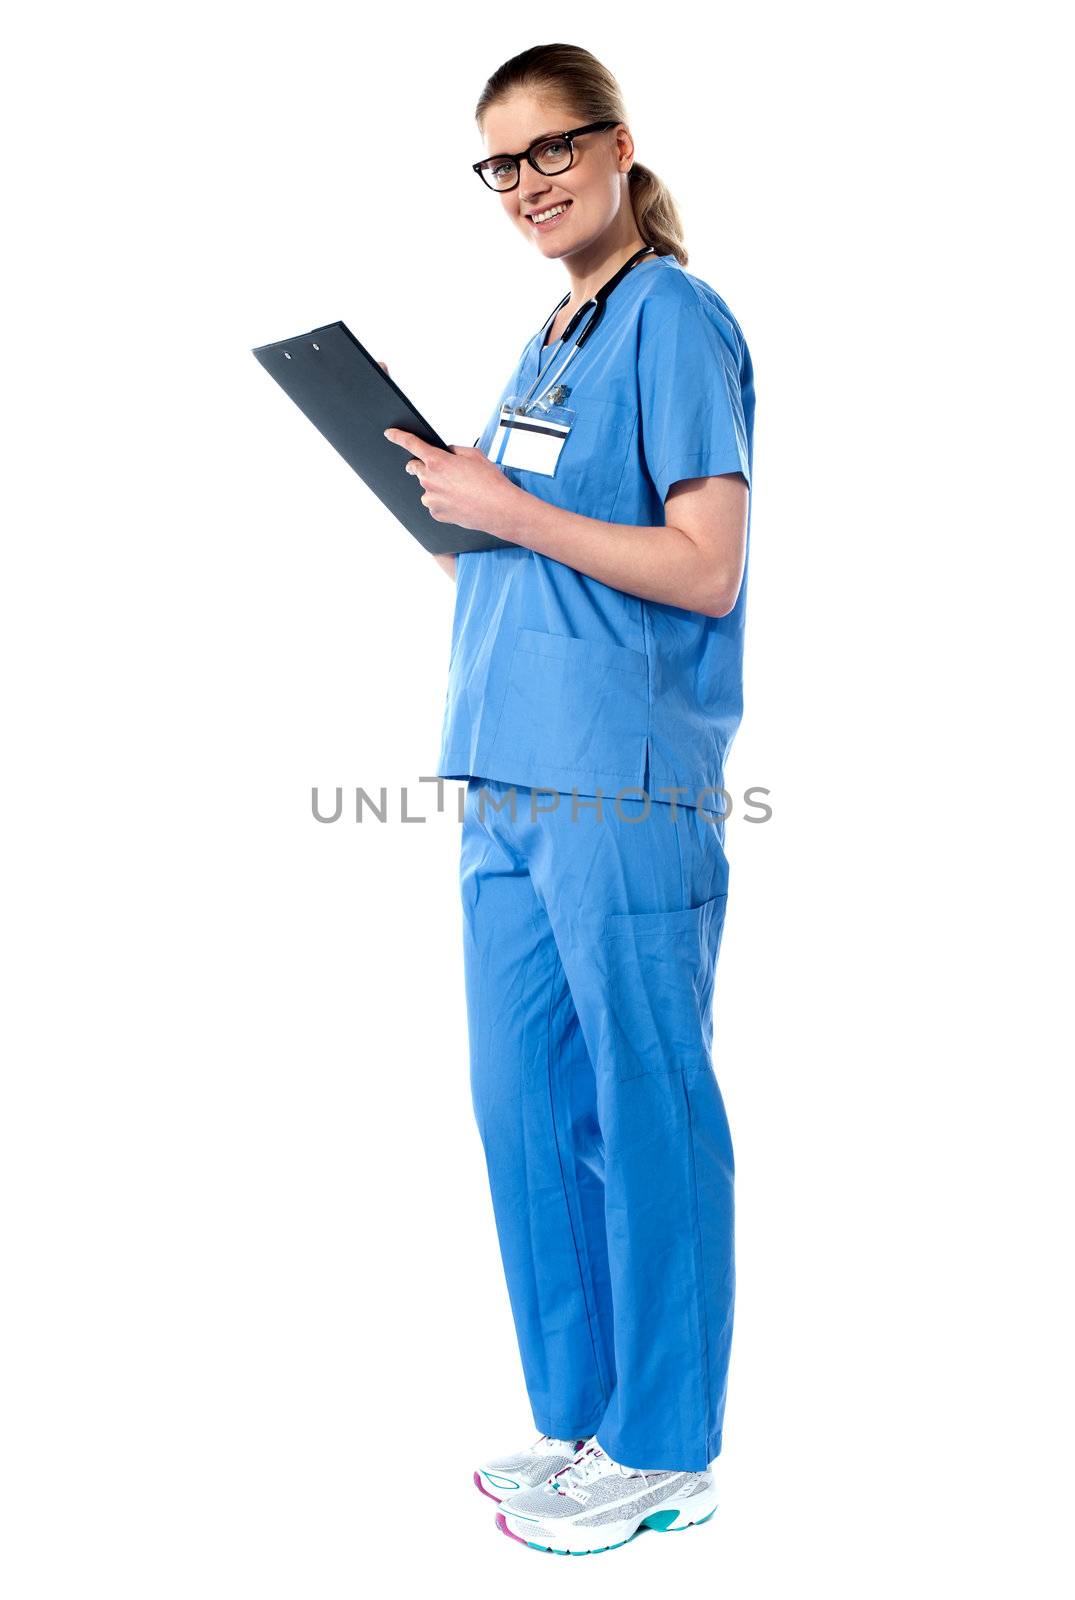 Lady doctor standing with stethoscope around her neck. Holidng clipboard